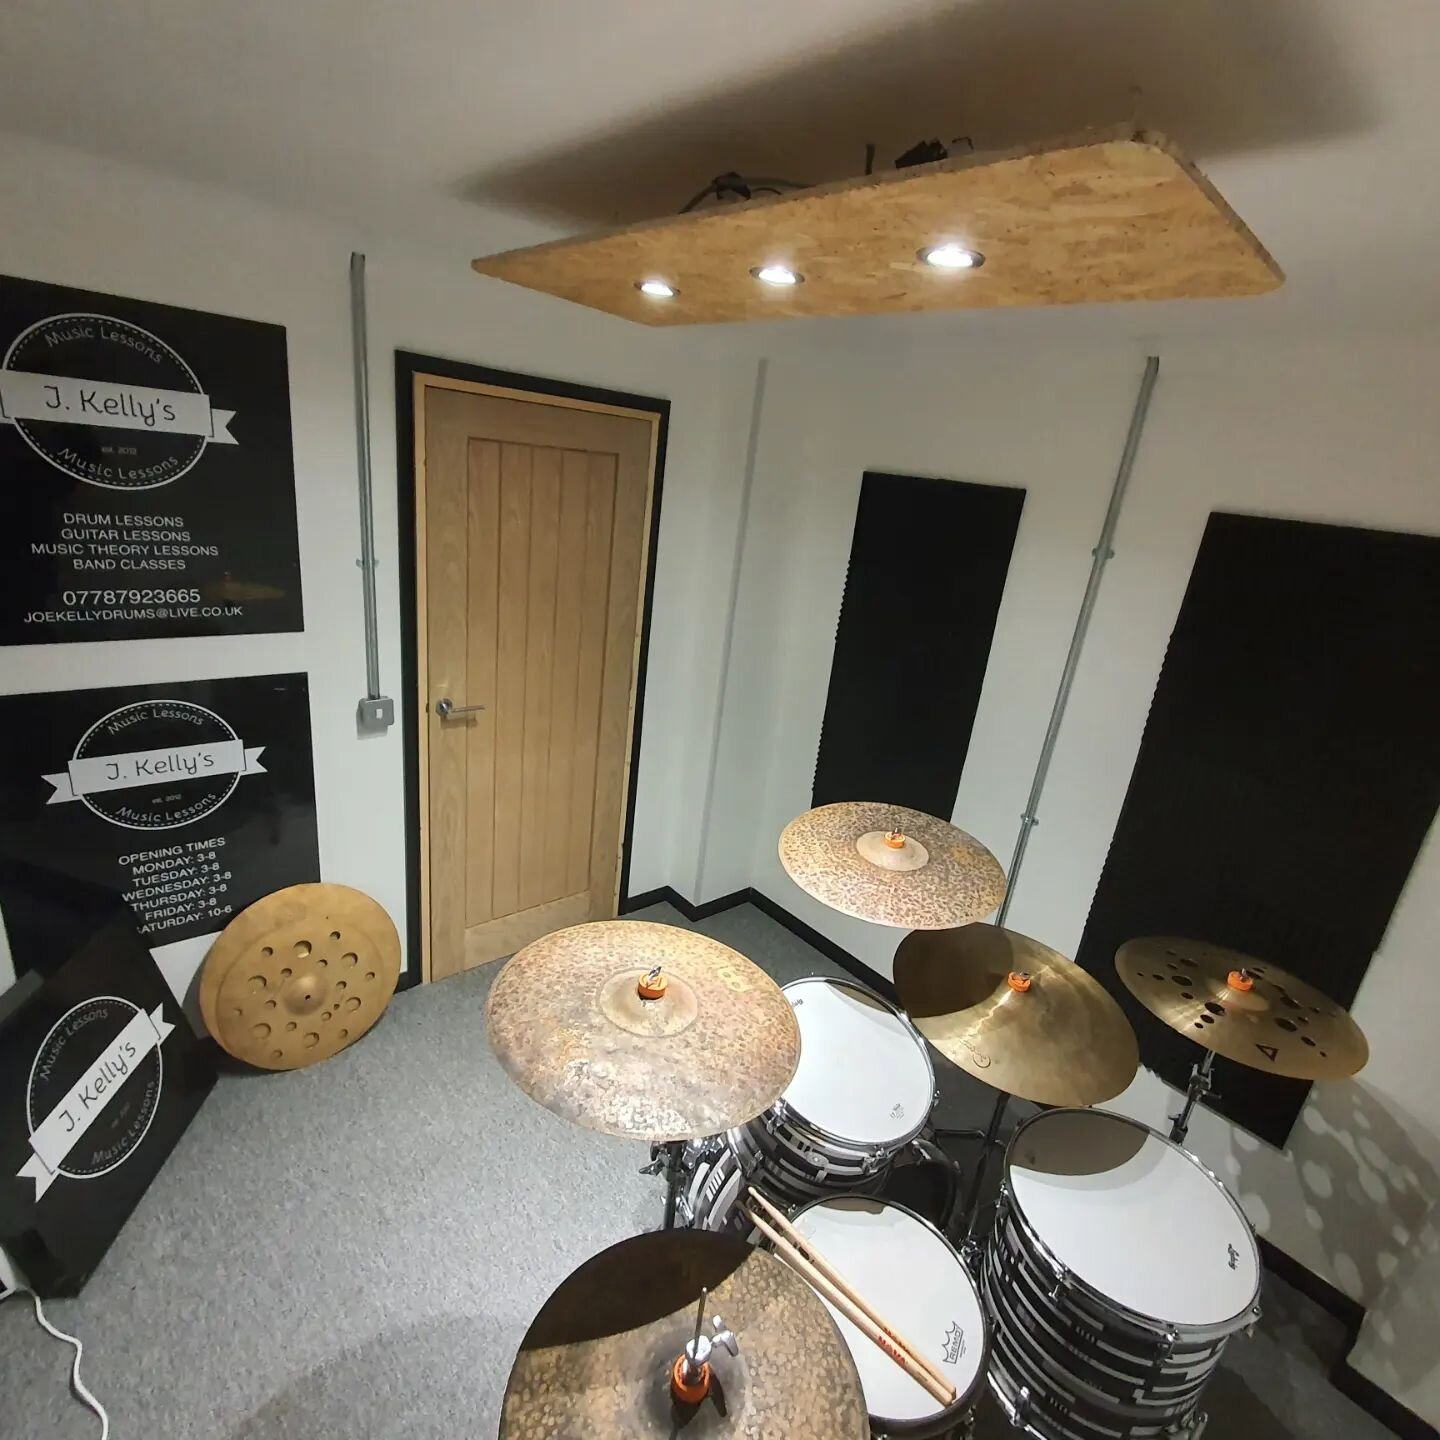 Rehearsal studio coming available this month. 2.6x2.55m &pound;450 pcm. Would suit a drummer, song writer, solo performer. Rolling monthly hire, 24 hour access, alarmed building, coded entry, 8k cctv, 350mb/s wifi. Call Ben to view on 07850575442 or 